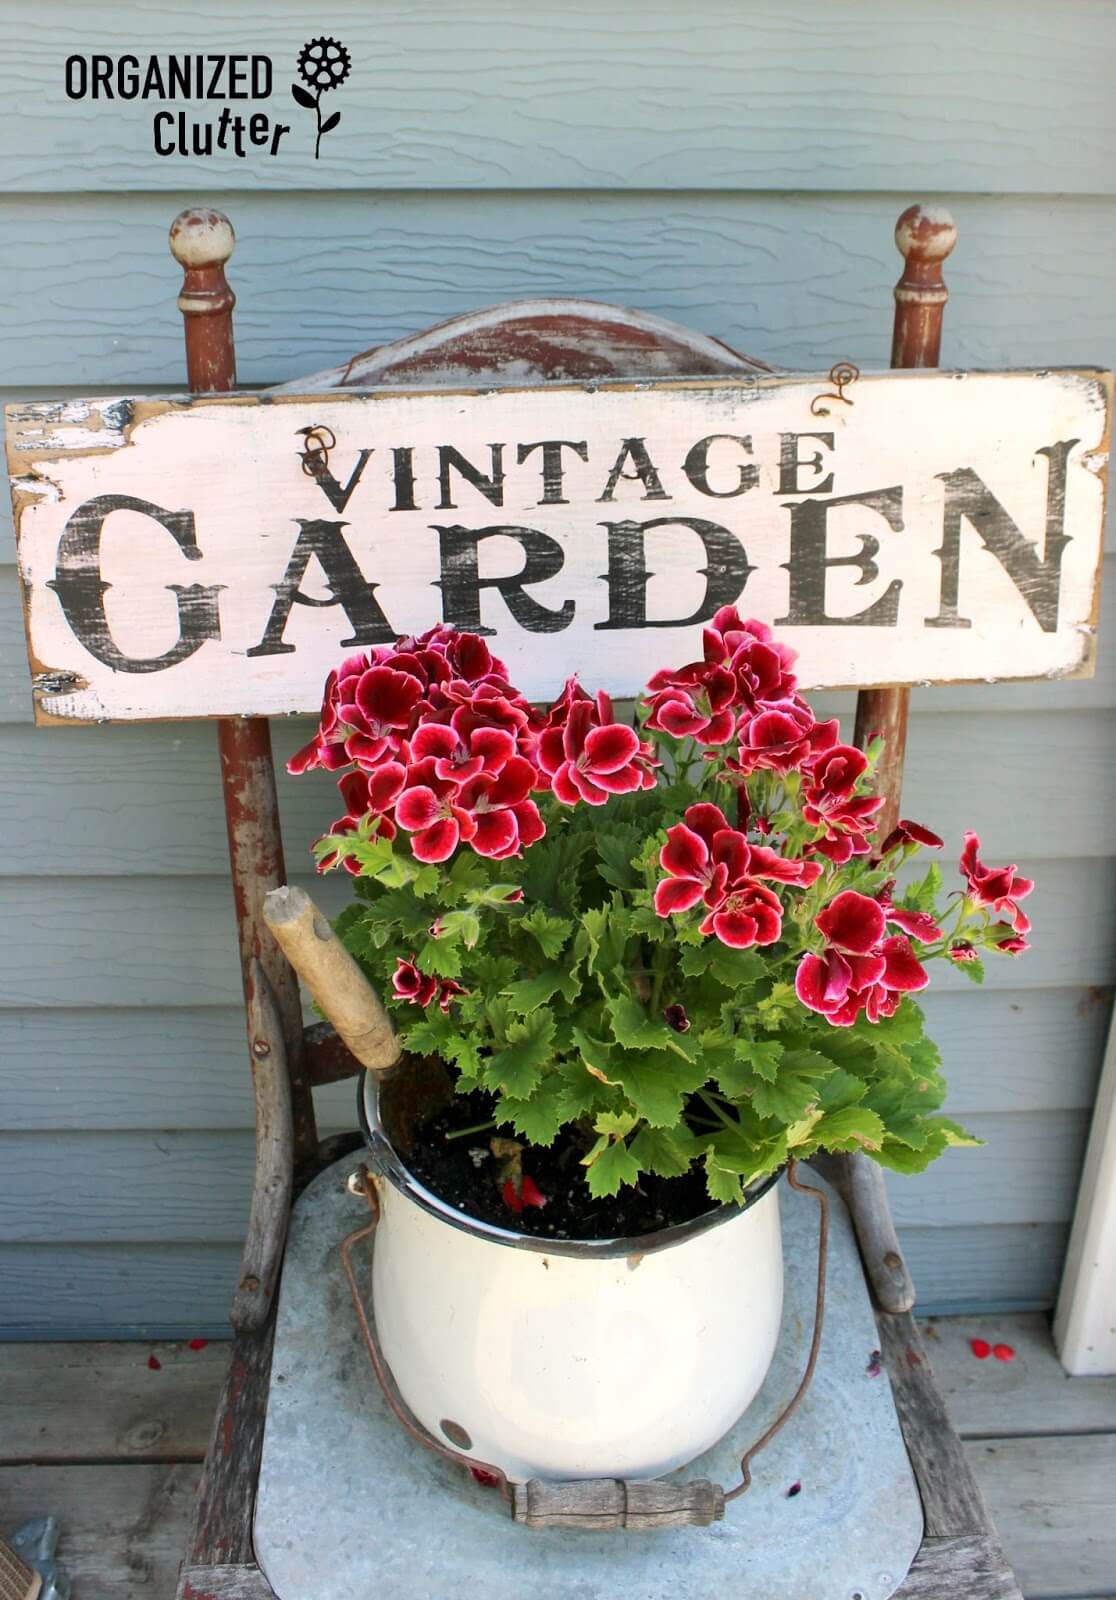 garden sign junk vintage old container signs chair funny flower updated gardening diy buckets pails reclaimed creative pots decor organizedclutter